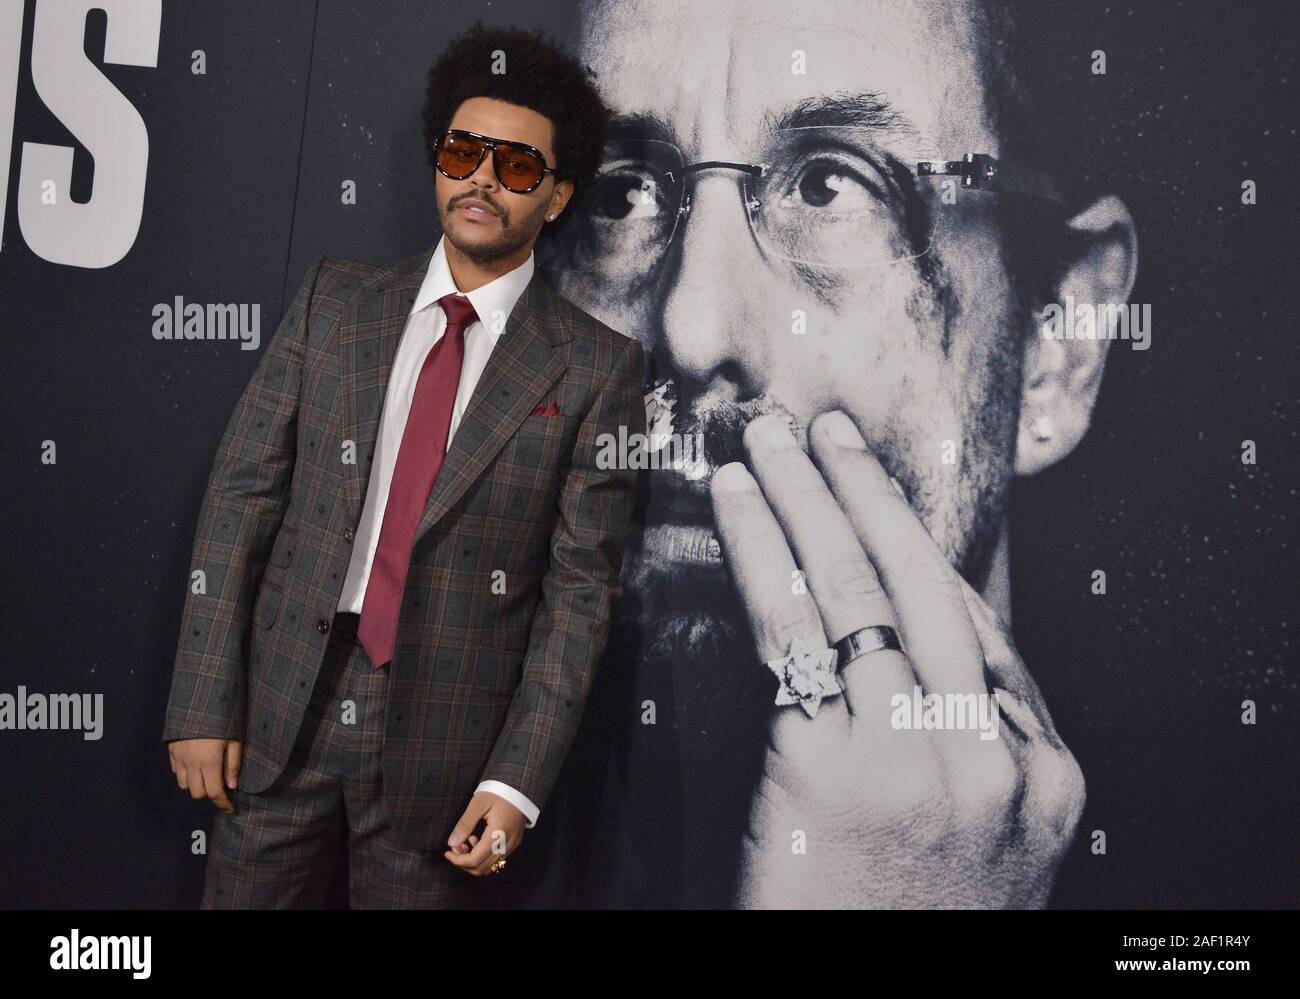 Los Angeles, USA. 11th Dec, 2019. The Weeknd arrives at the UNCUT GEMS Los Angeles Premiere held at the ArcLight Cinerama Dome in Los Angeles, CA on Wednesday, ?December 11, 2019. (Photo By Sthanlee B. Mirador/Sipa USA) Credit: Sipa USA/Alamy Live News Stock Photo